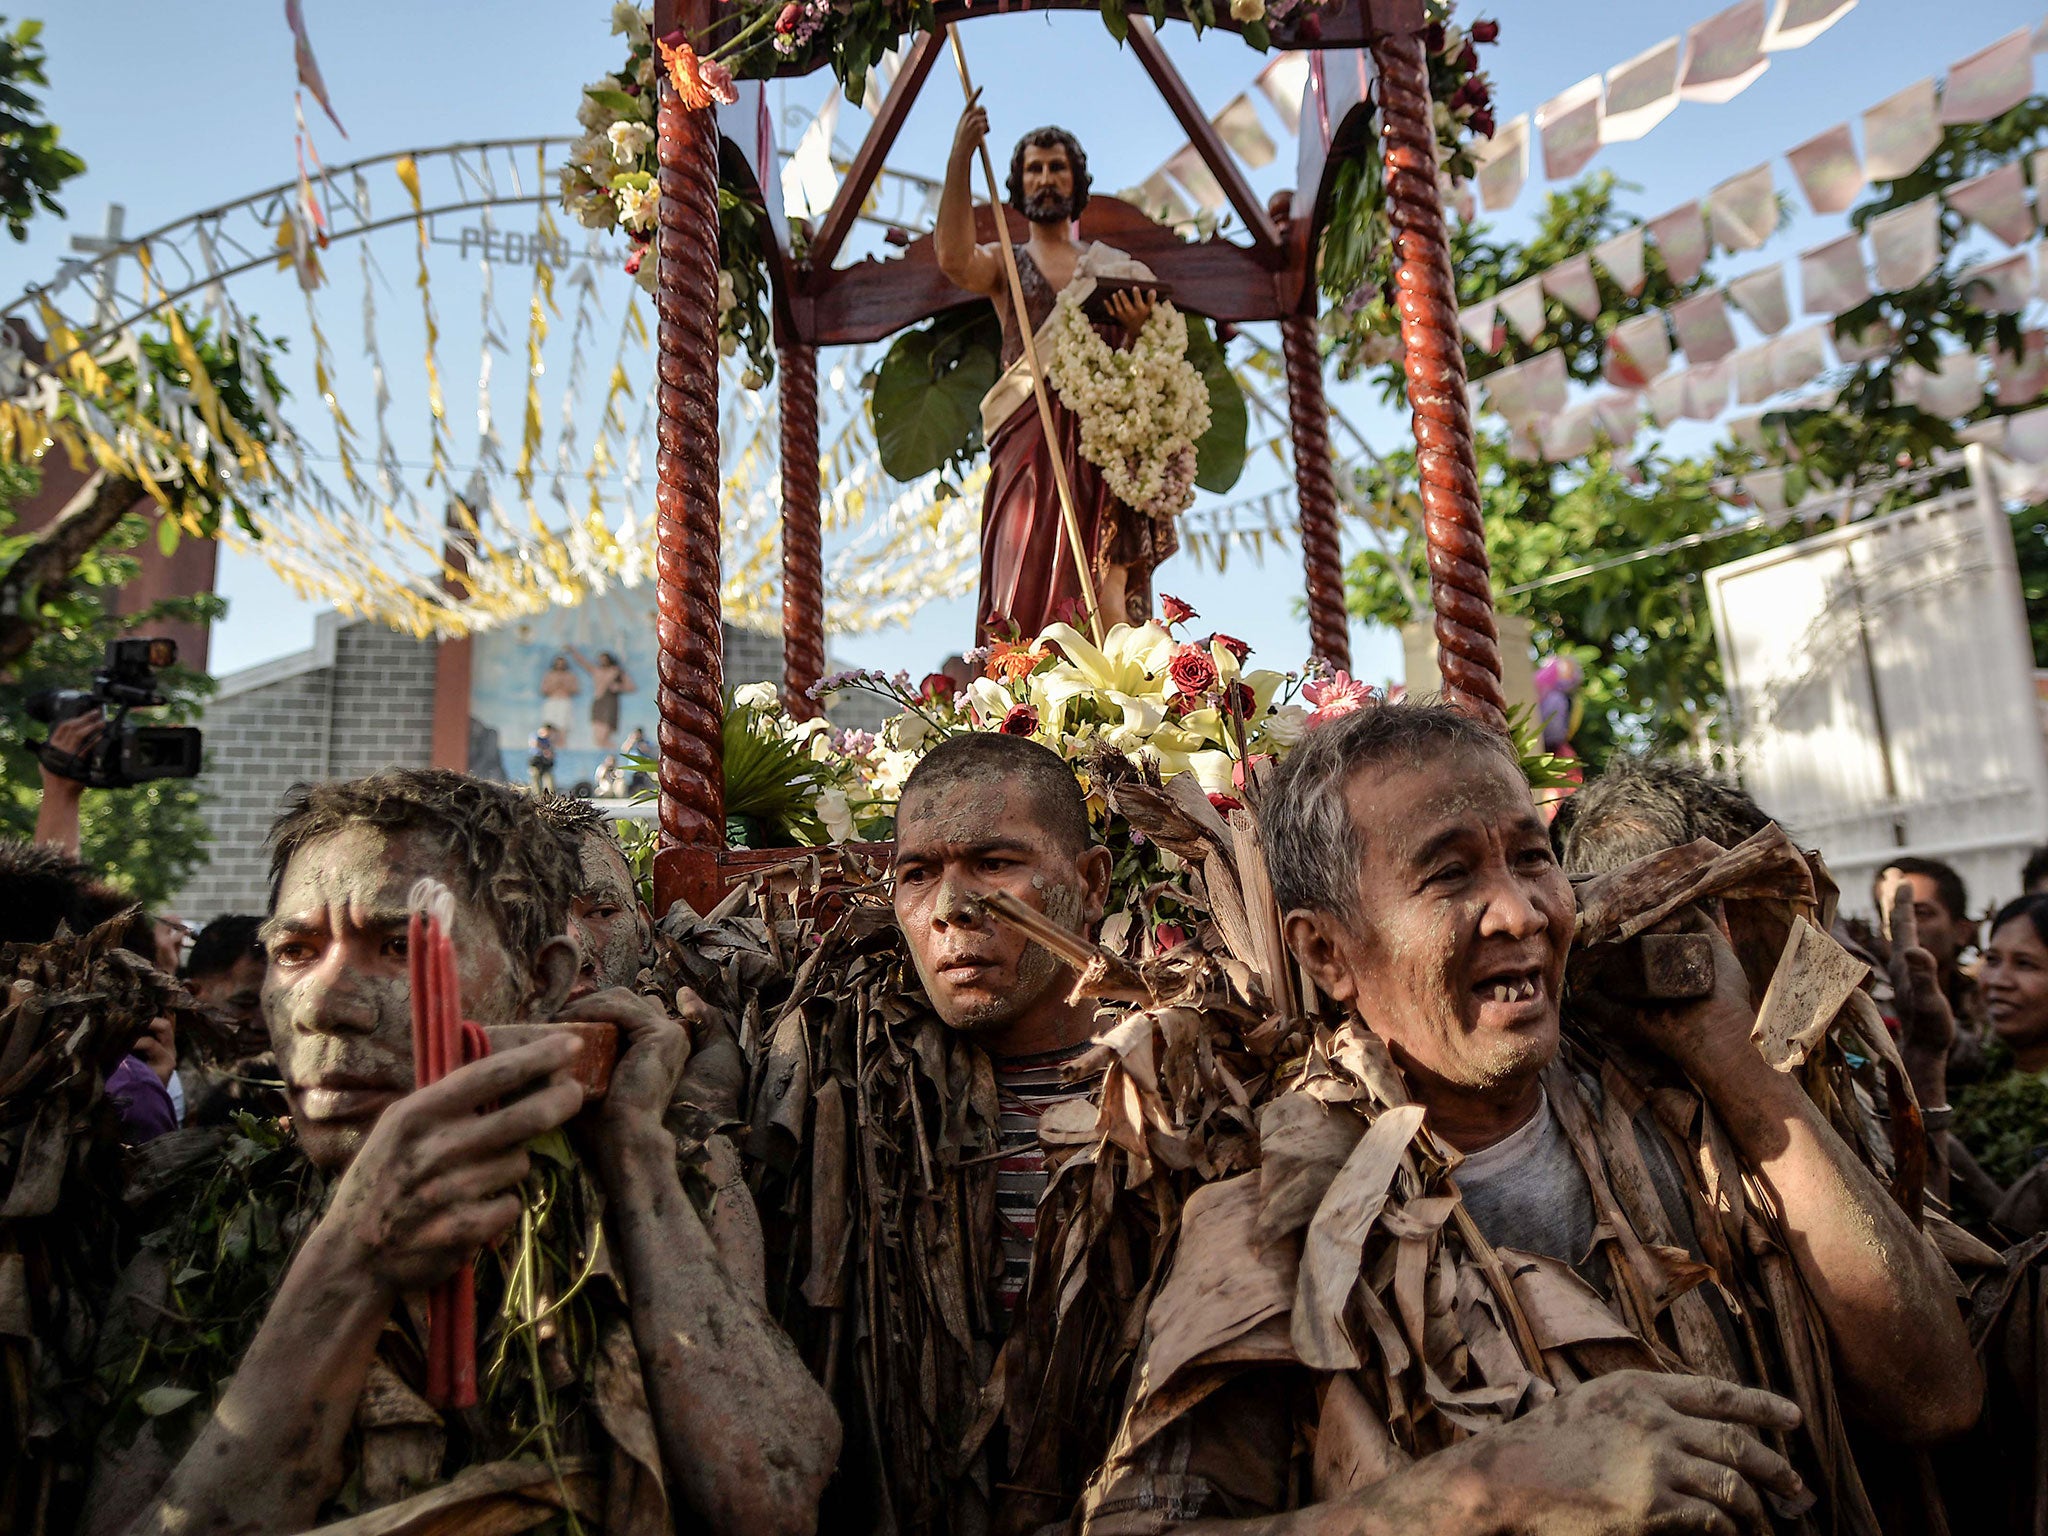 Filipino devotees covered in mud and dried leaves carry an image of Saint John the Baptist during a procession in a pagan religious tradition to mark the 'Taong Putik' (Mud People) festival and the Feast of Saint John the Baptist in the village of Bibicla